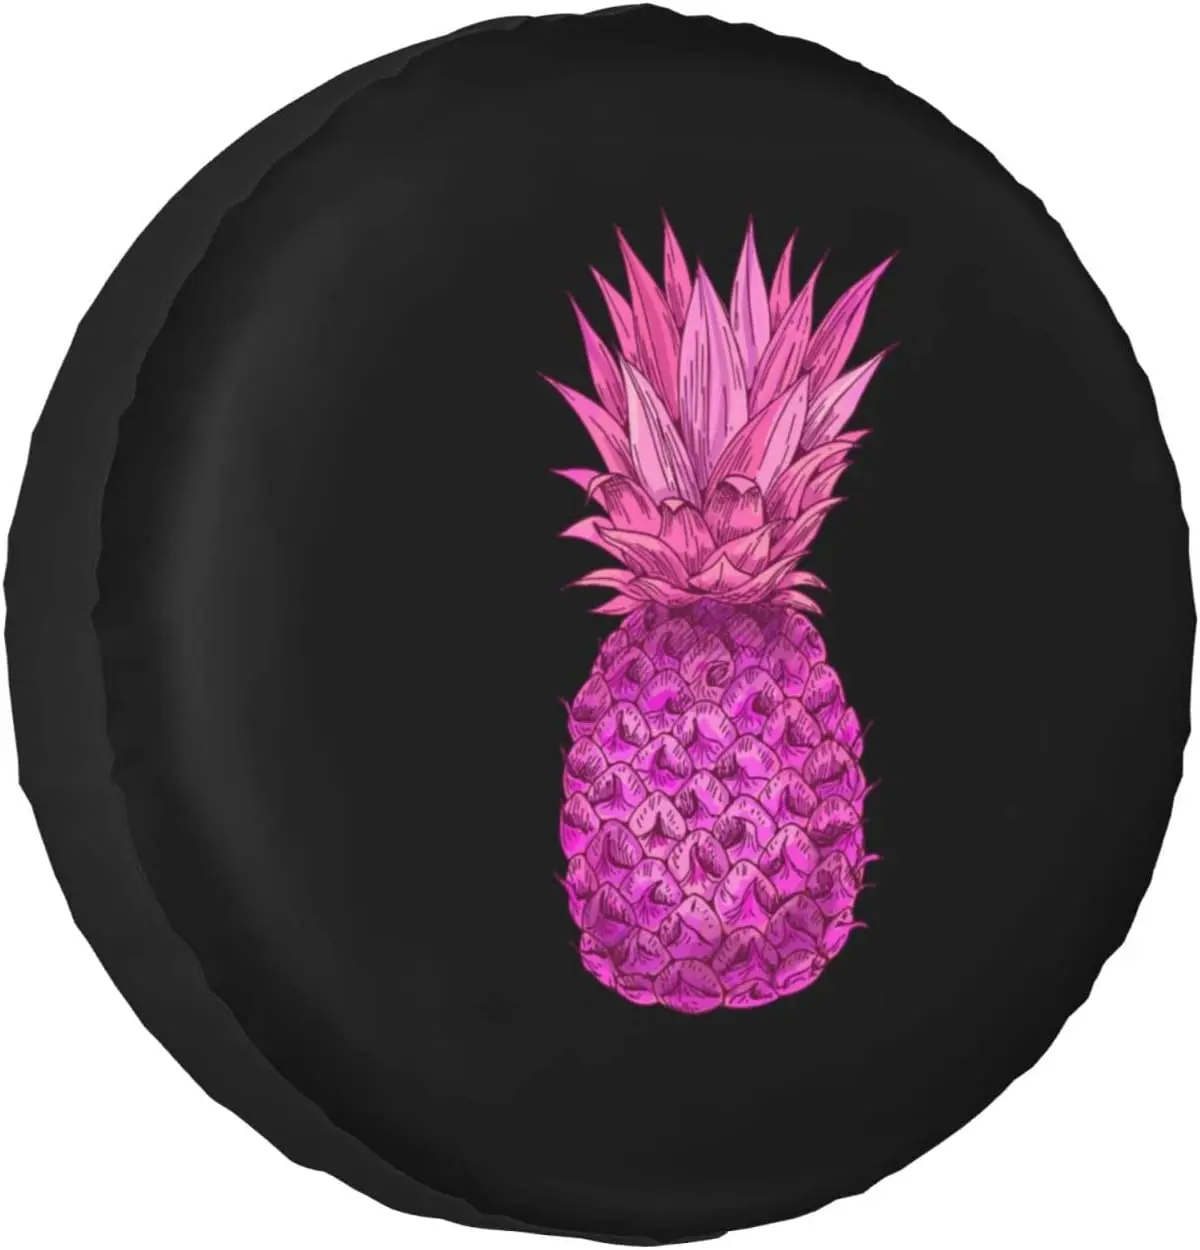 

Gopa Spare Tire Cover Pineapple Waterproof Dust-Proof UV Sun Wheel Protectors Universal Fit Suitable for most vehicles